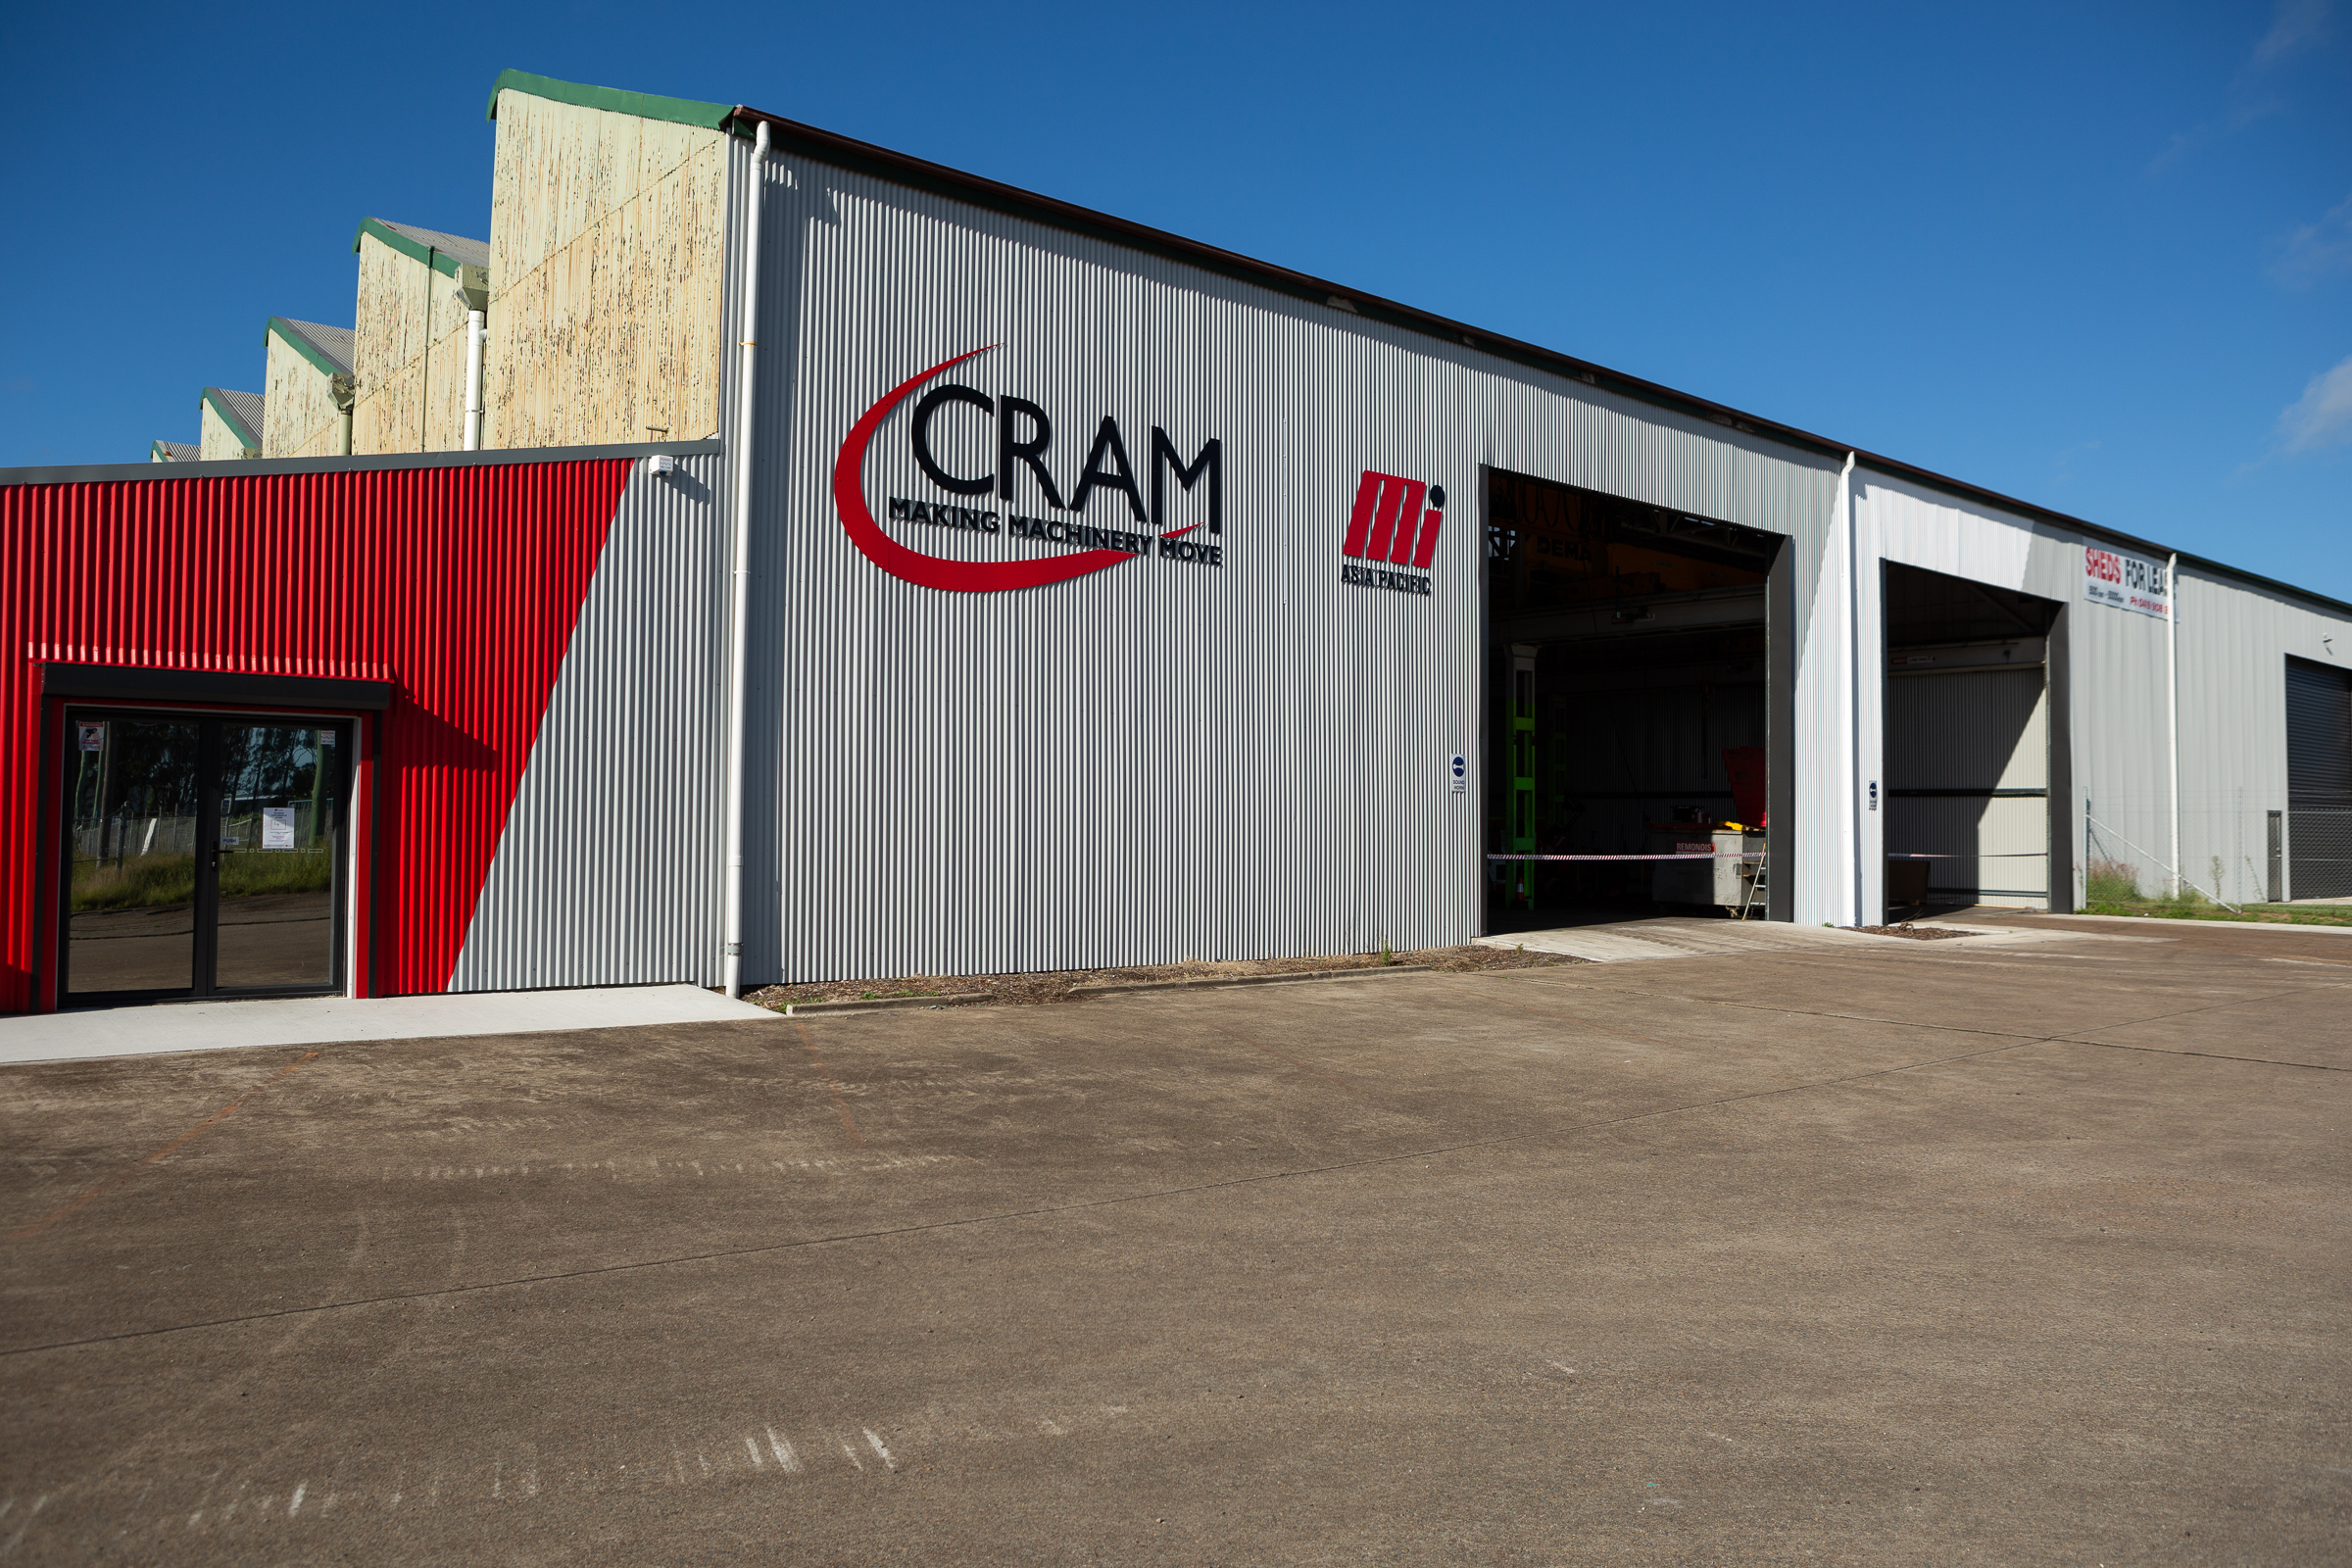 CRAM branded building with CRAM red stripe Cram logo and co-brand Motion Asia Pacific